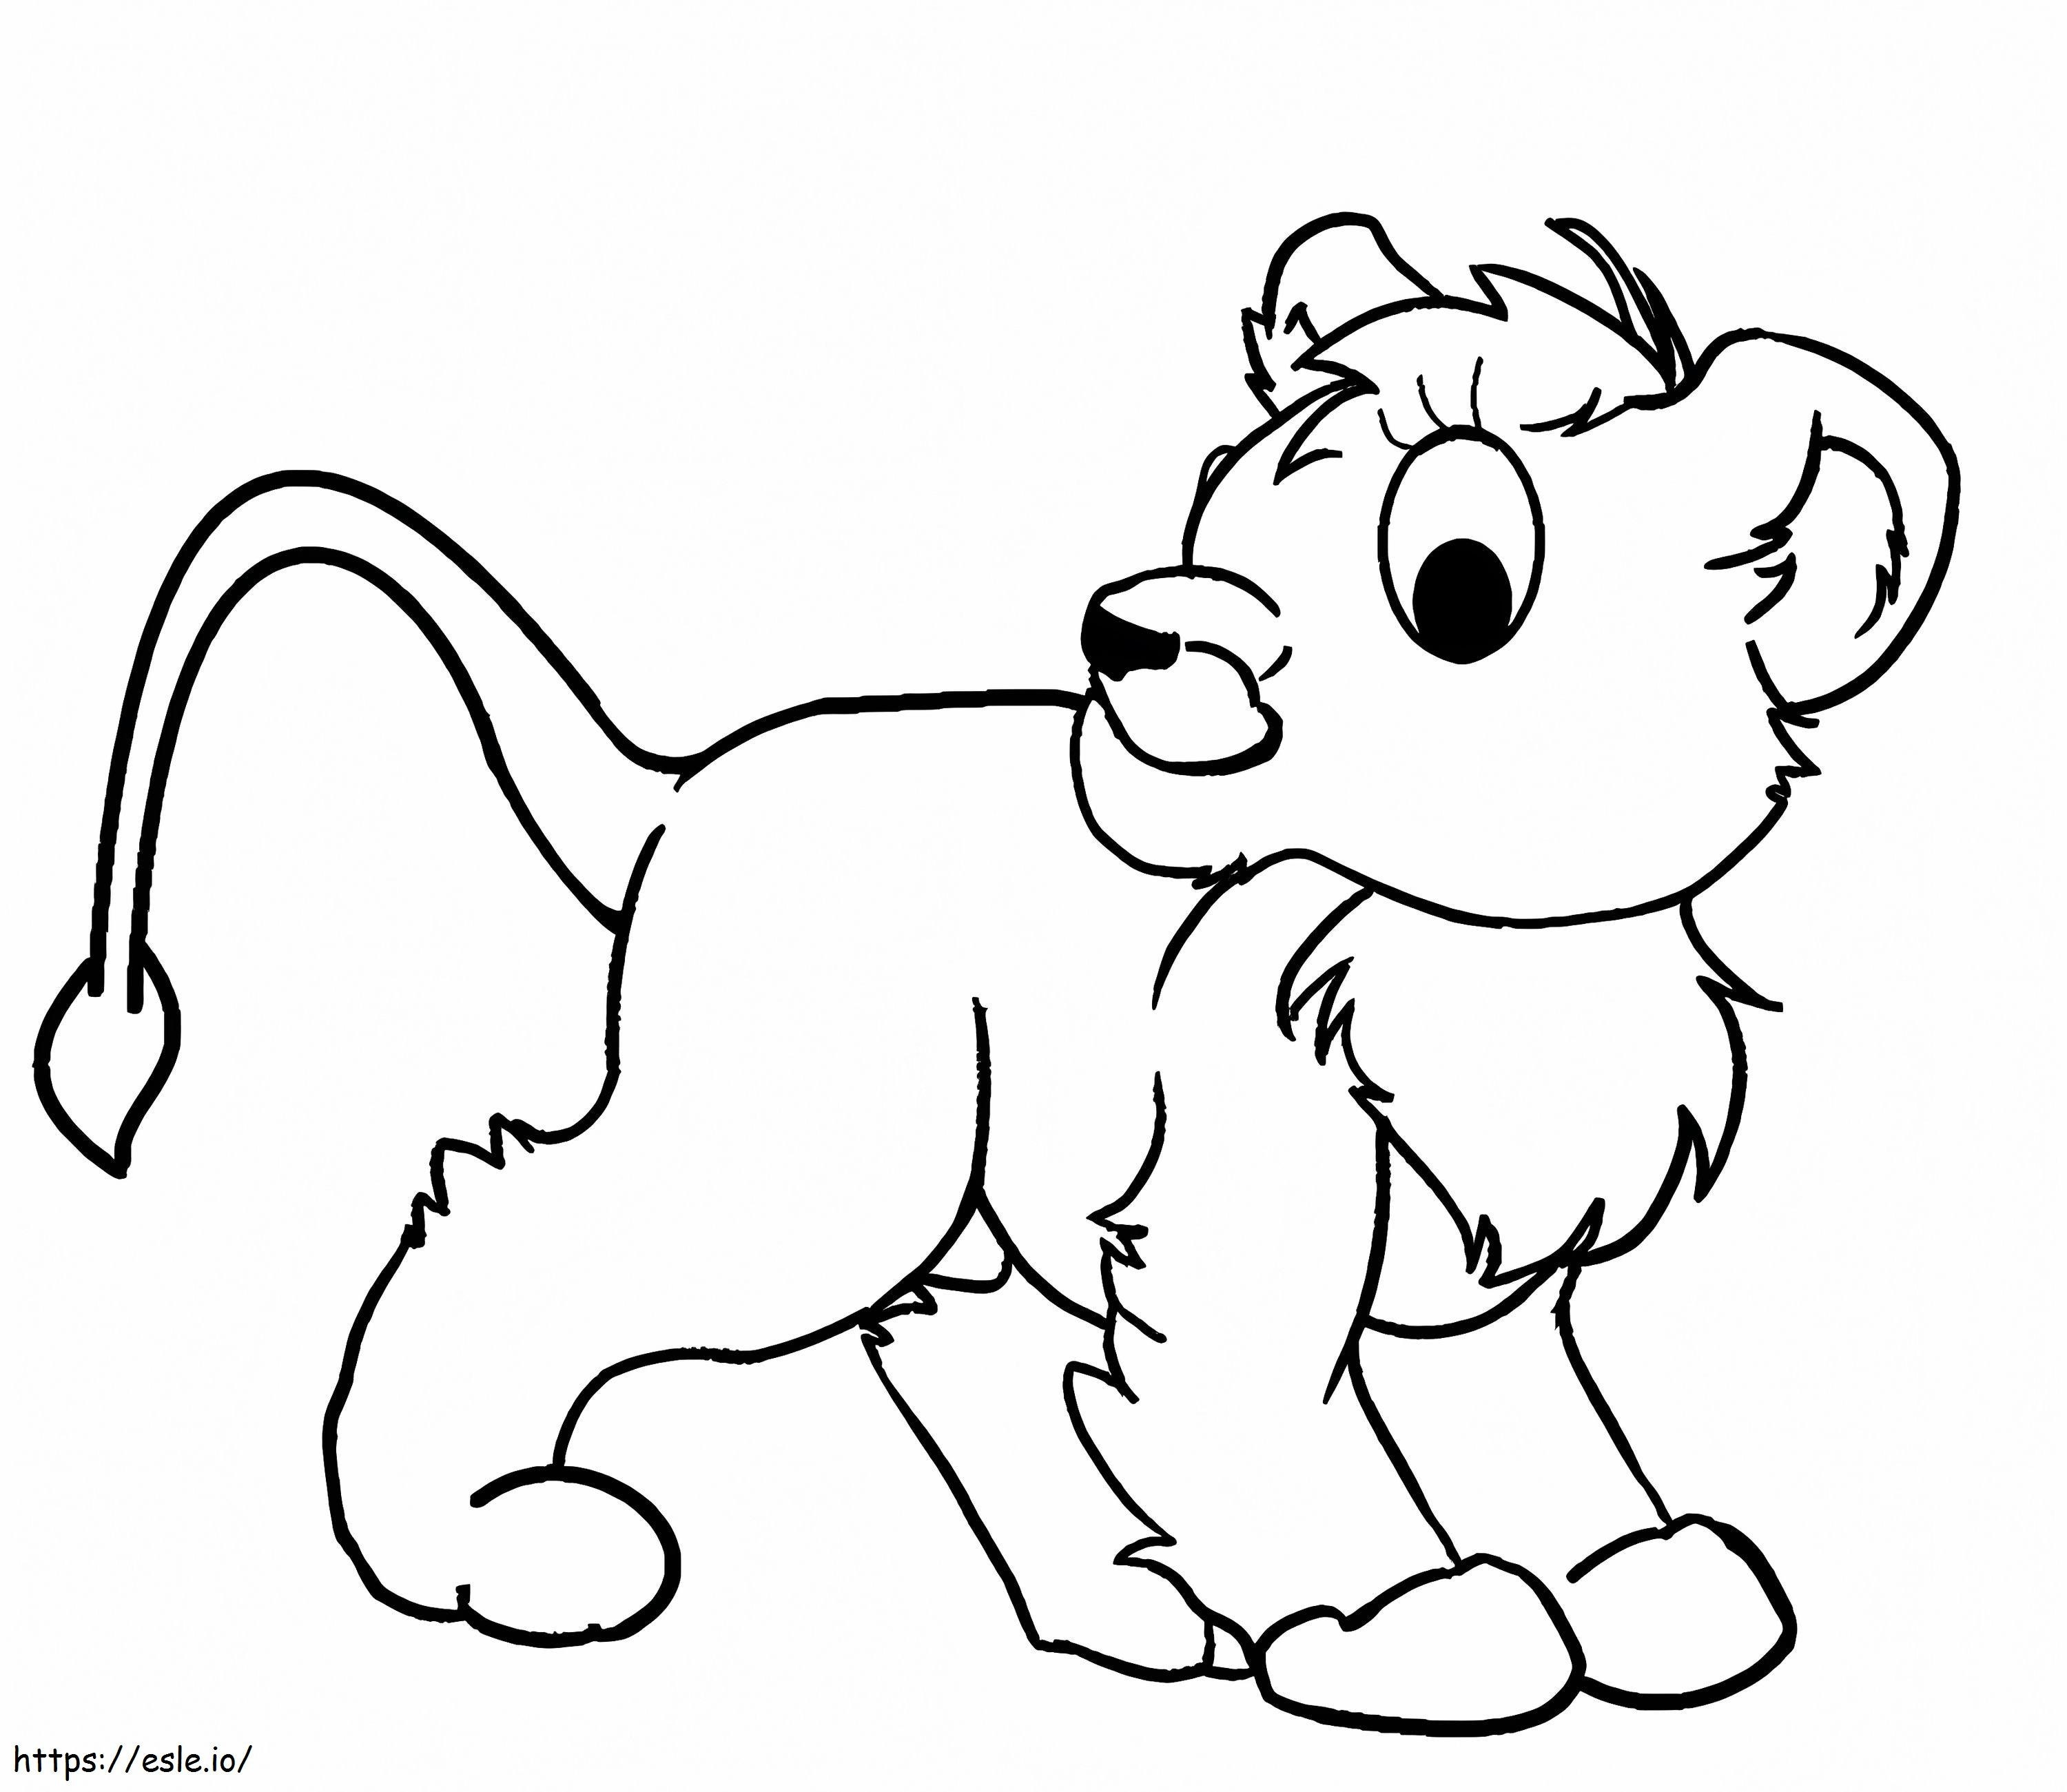 Webkinz Lion coloring page